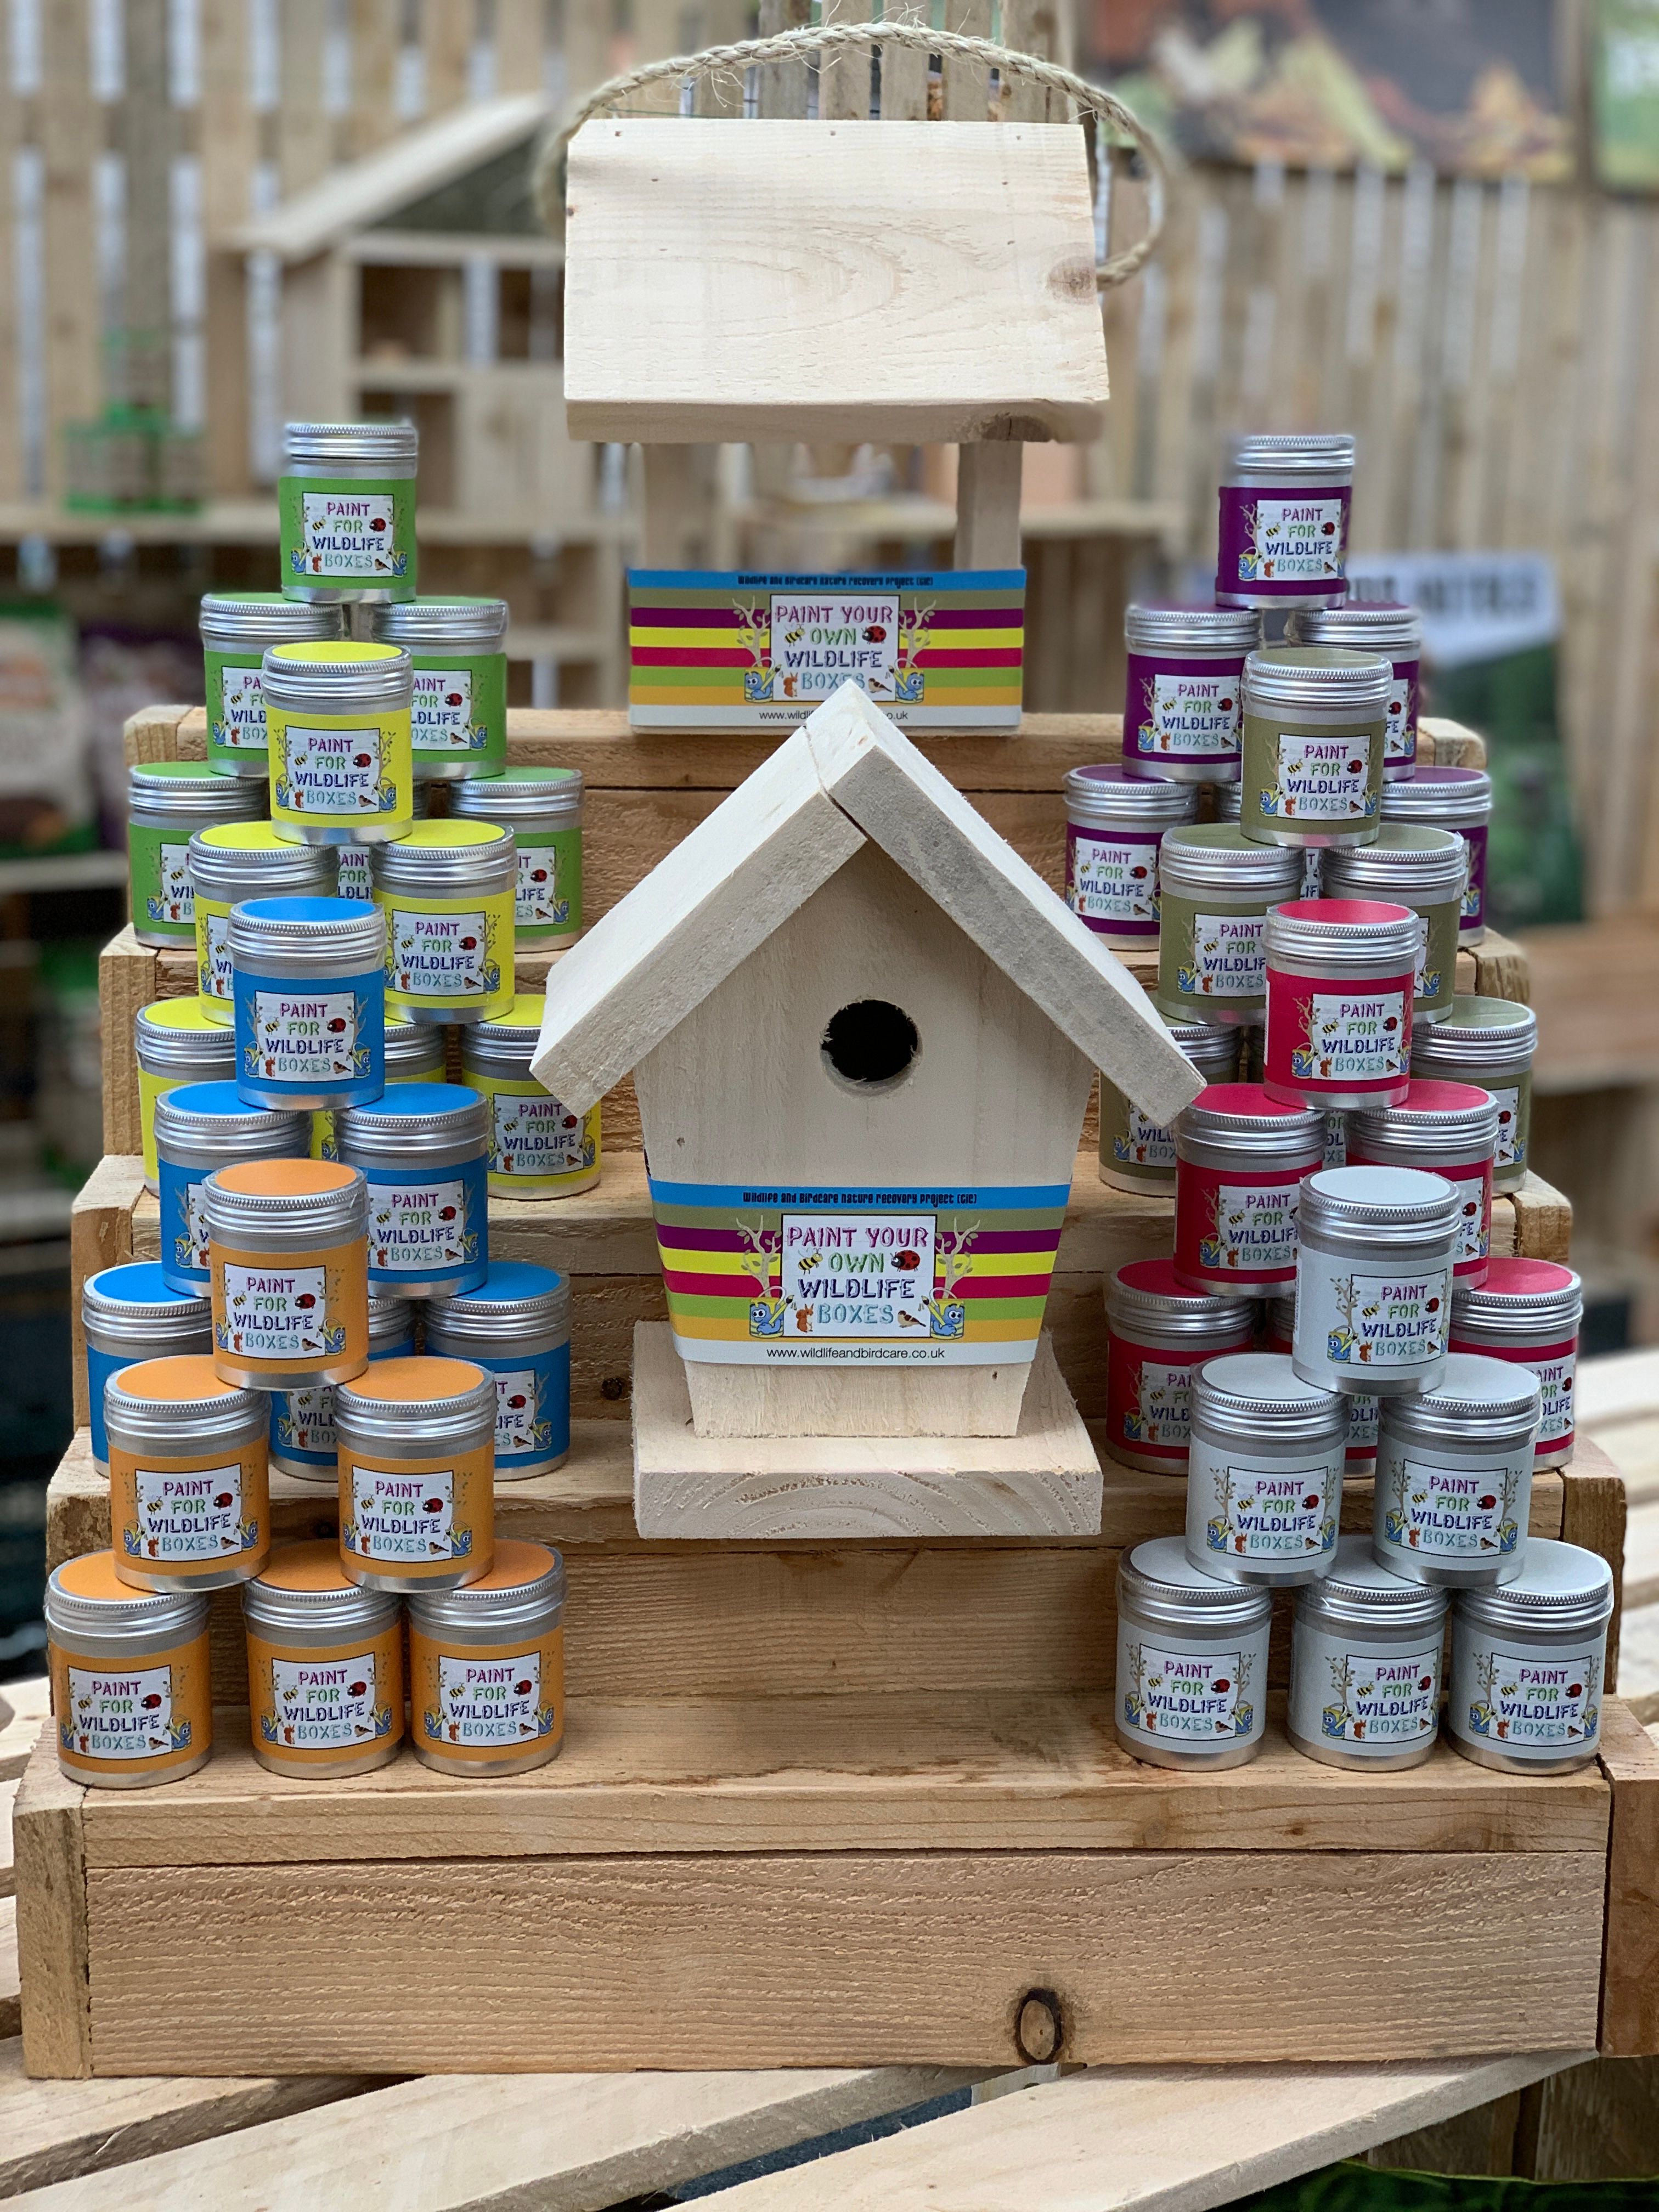 Paint your Own Wildlife Box